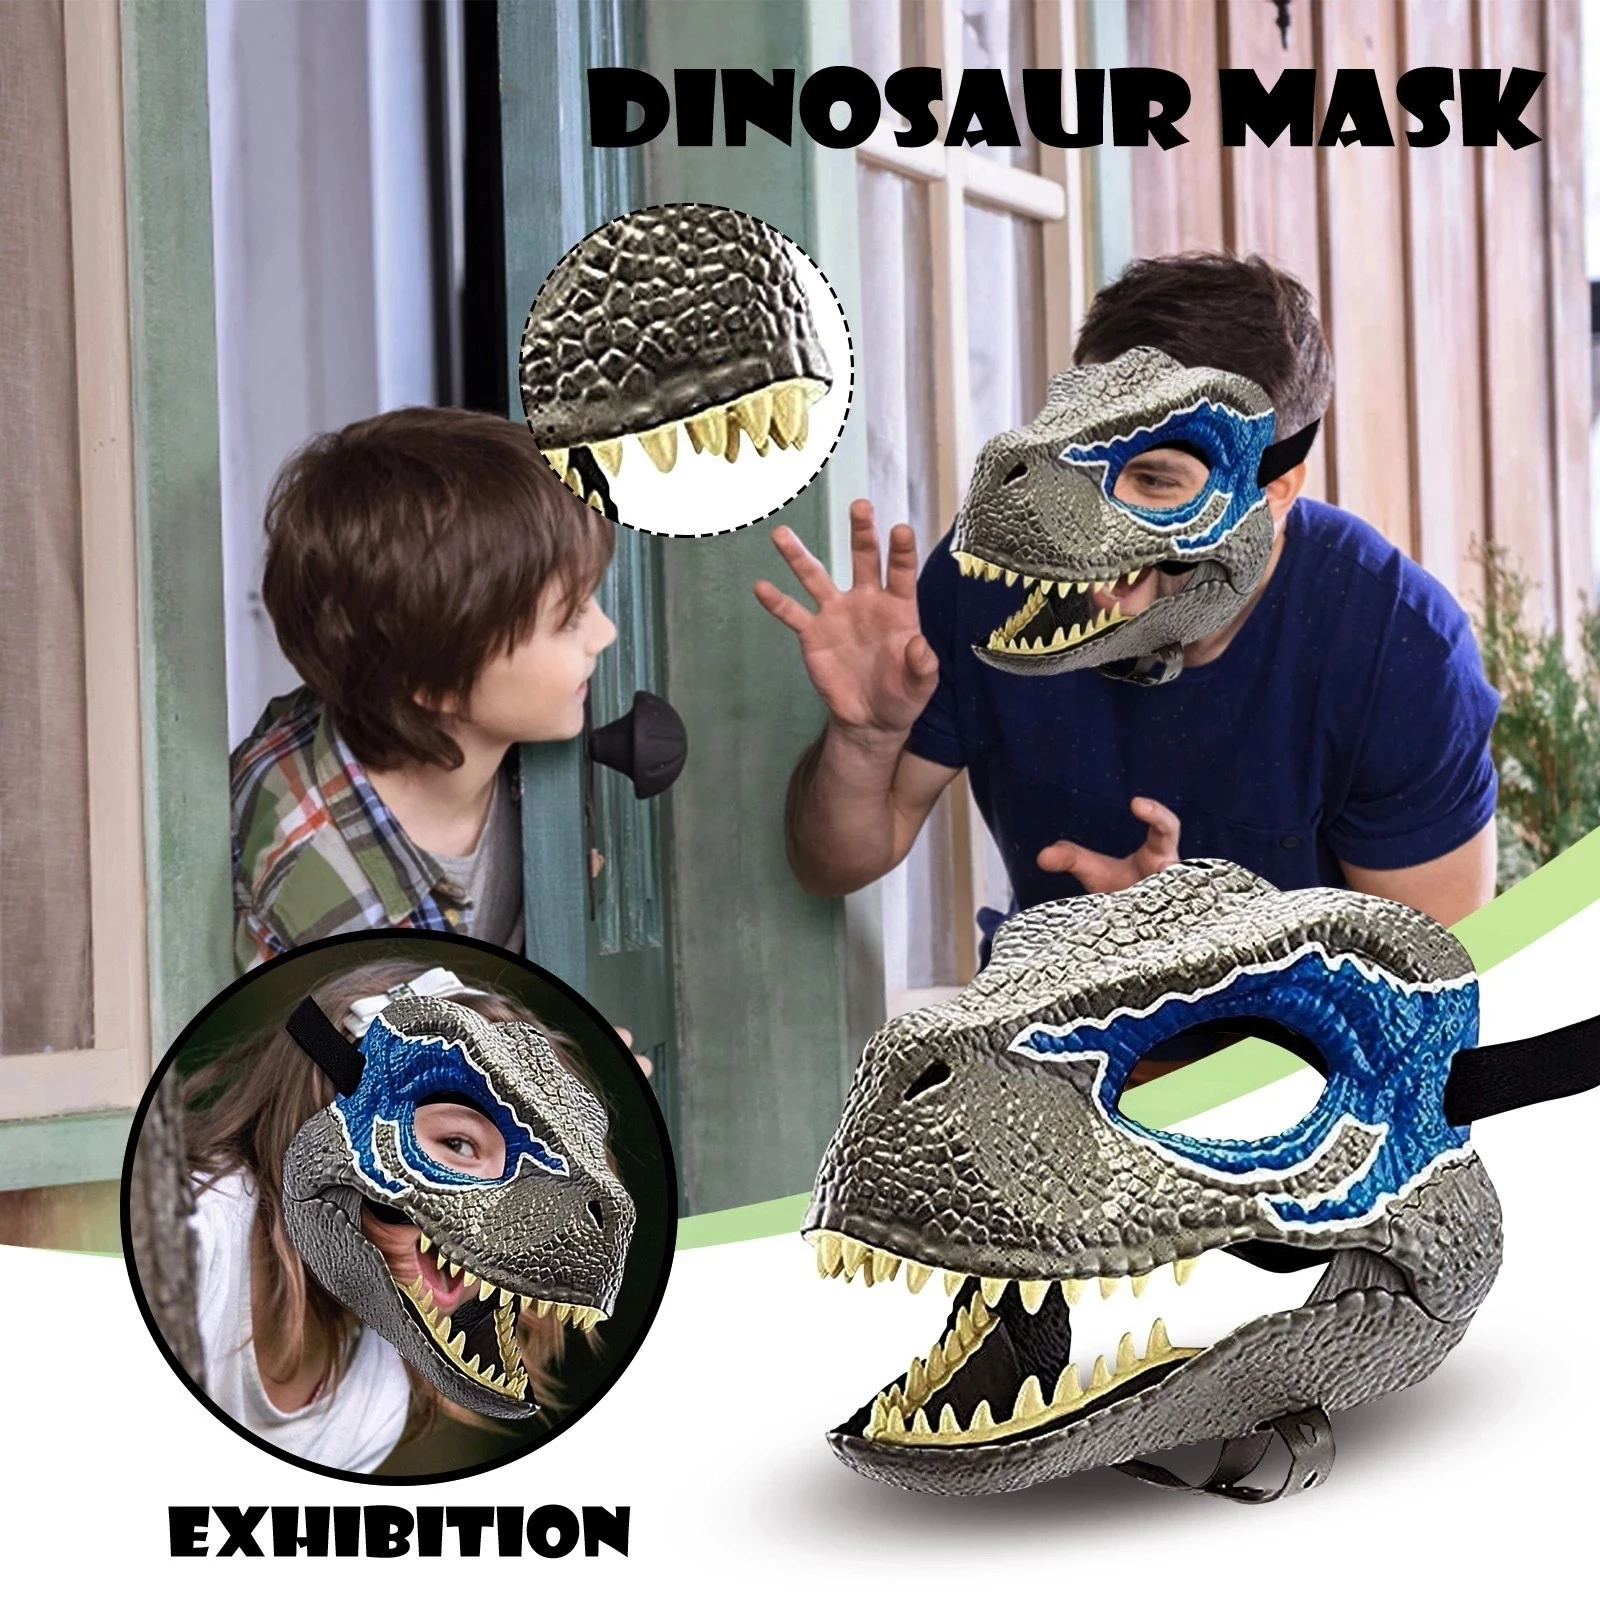 2022 New Dragon Mask Movable Jaw Dino Mask Moving Jaw Dinosaur Decor Mask for Halloween Party Cosplay Mask Decoration Funny Toy